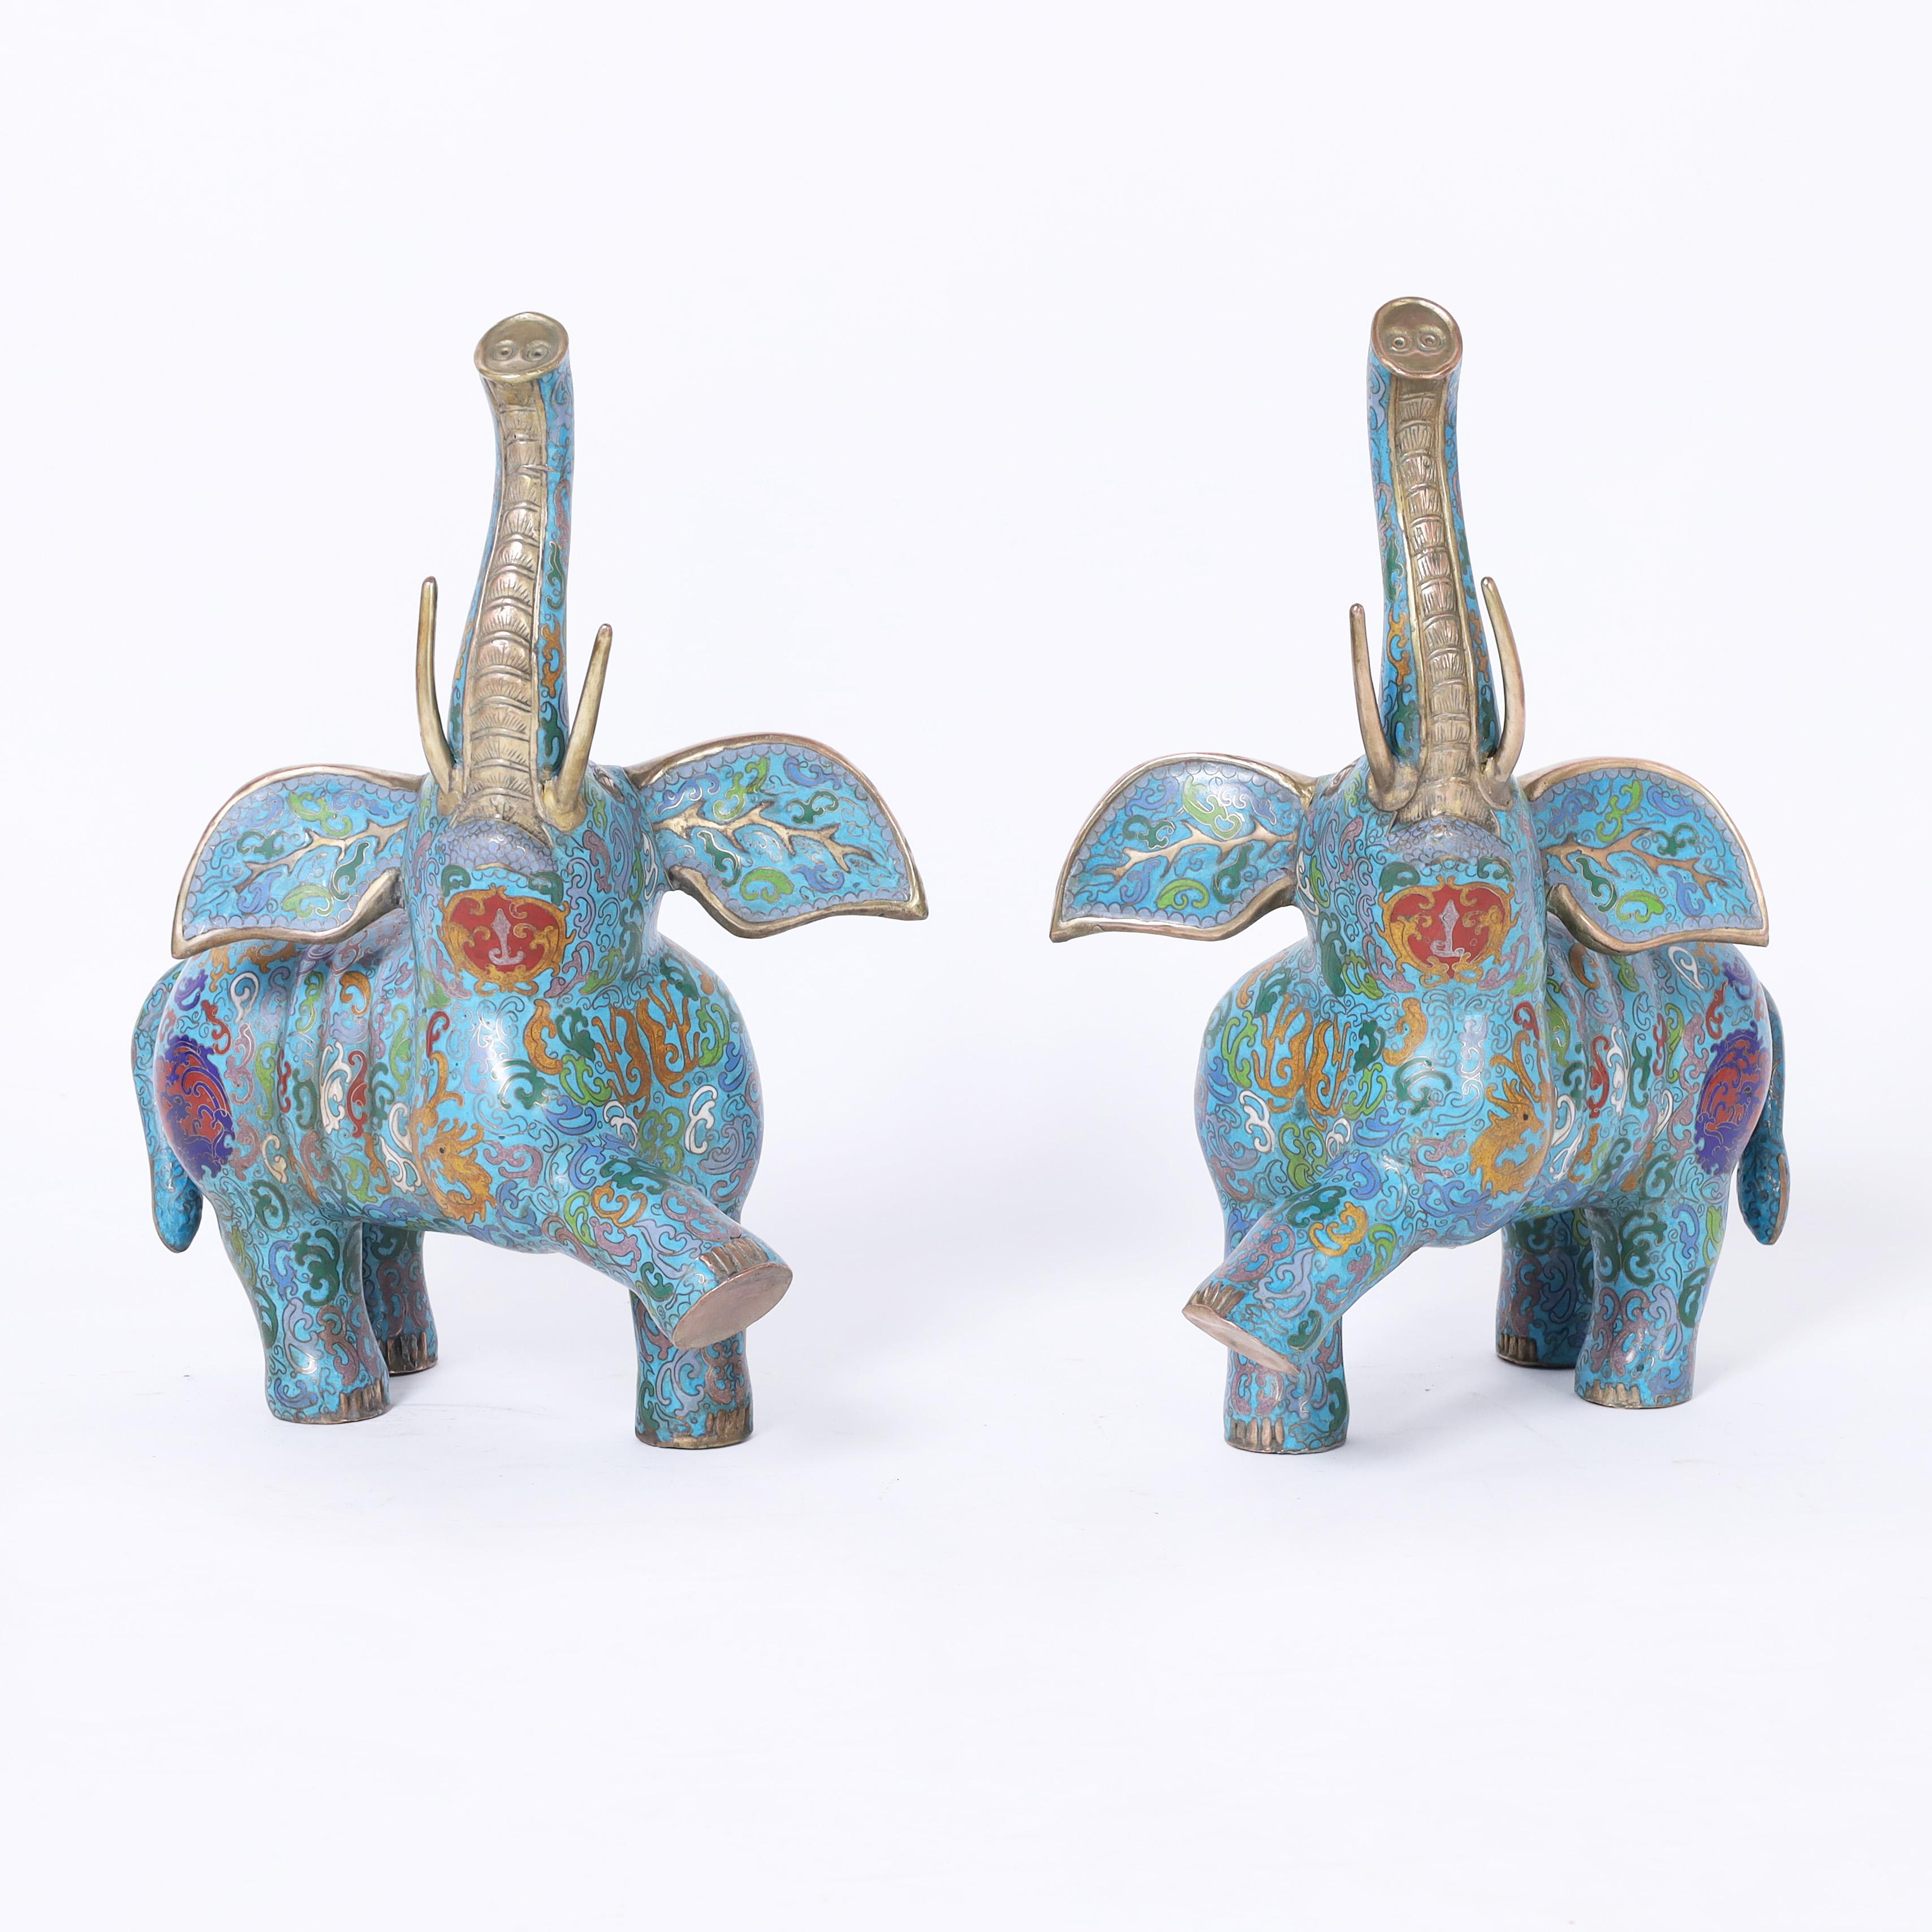 Enchanting pair of vintage Chinese cloisonne or enamel on brass elephants in a dancing pose having floral symbolic designs on an alluring blue background. Trunk up for good luck. 